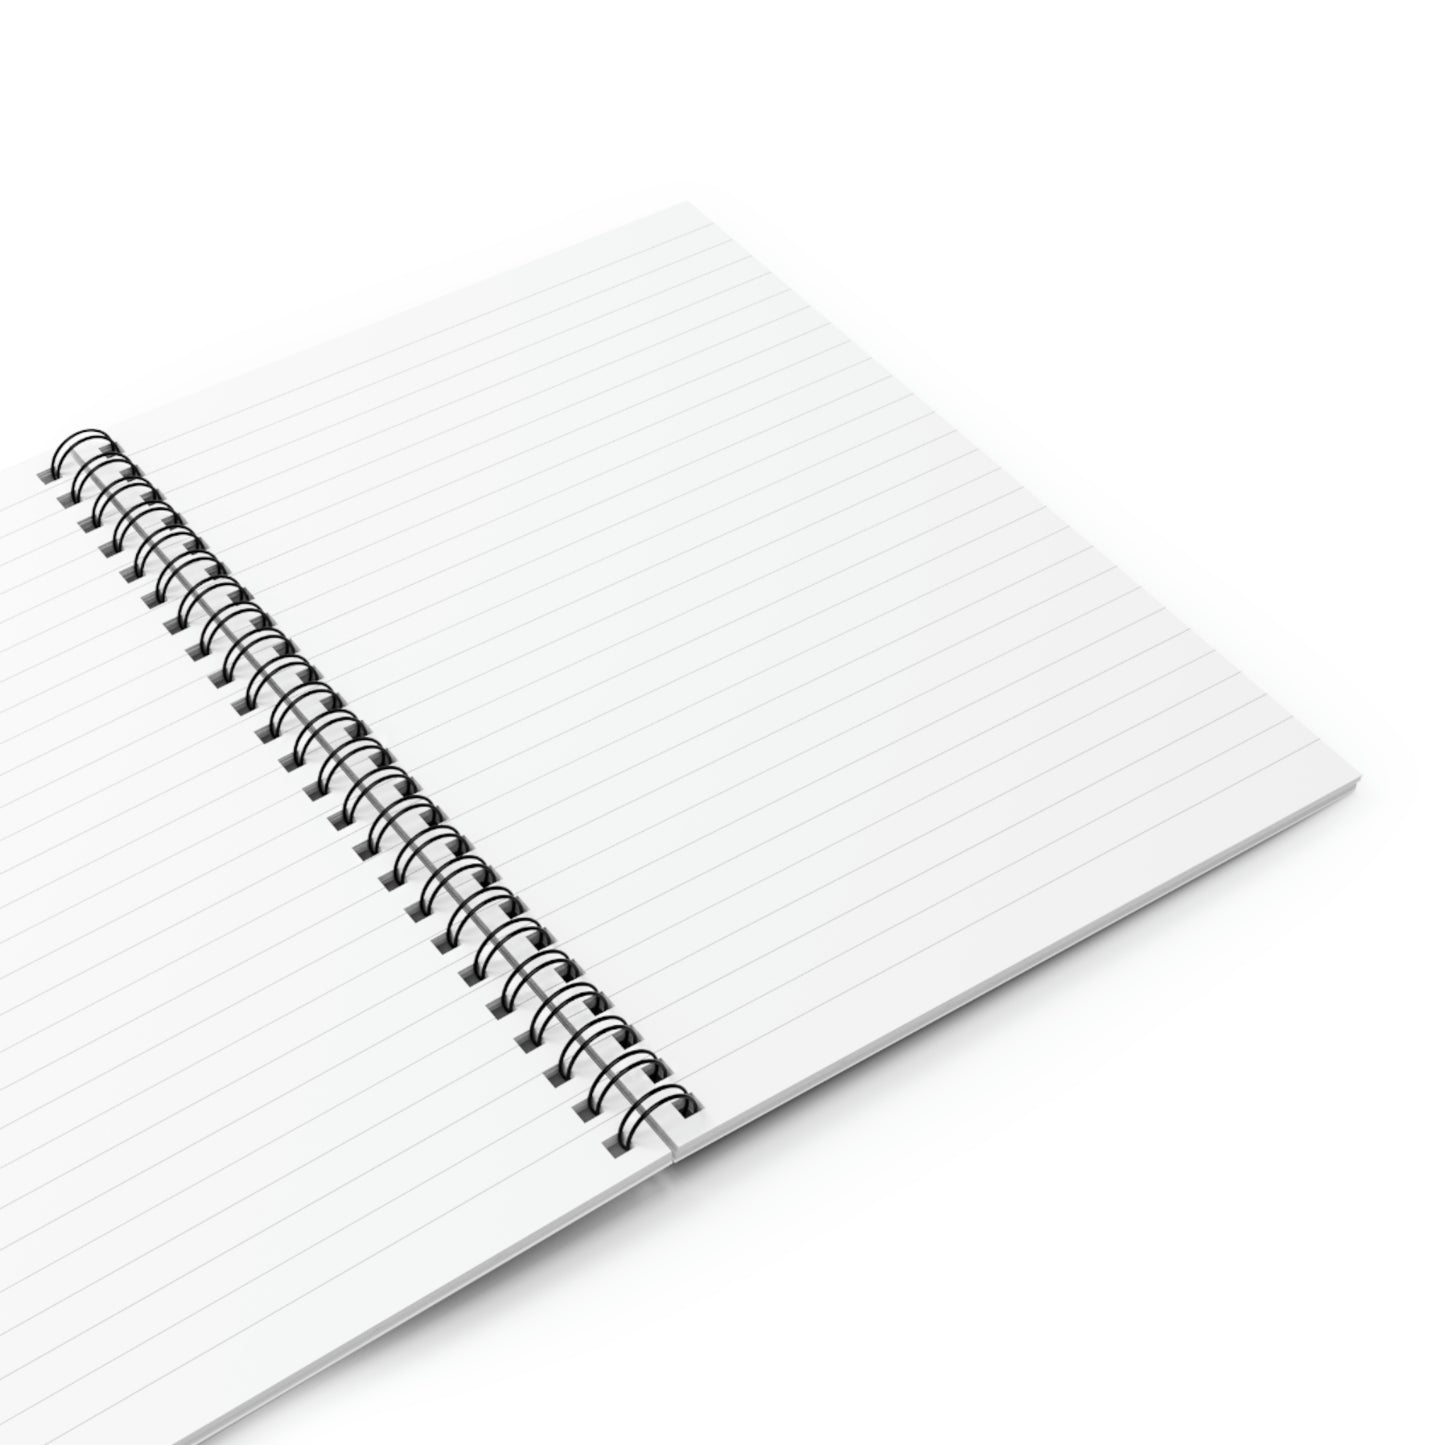 Catherine Hayford, Nap Time Spiral Notebook - Ruled Line